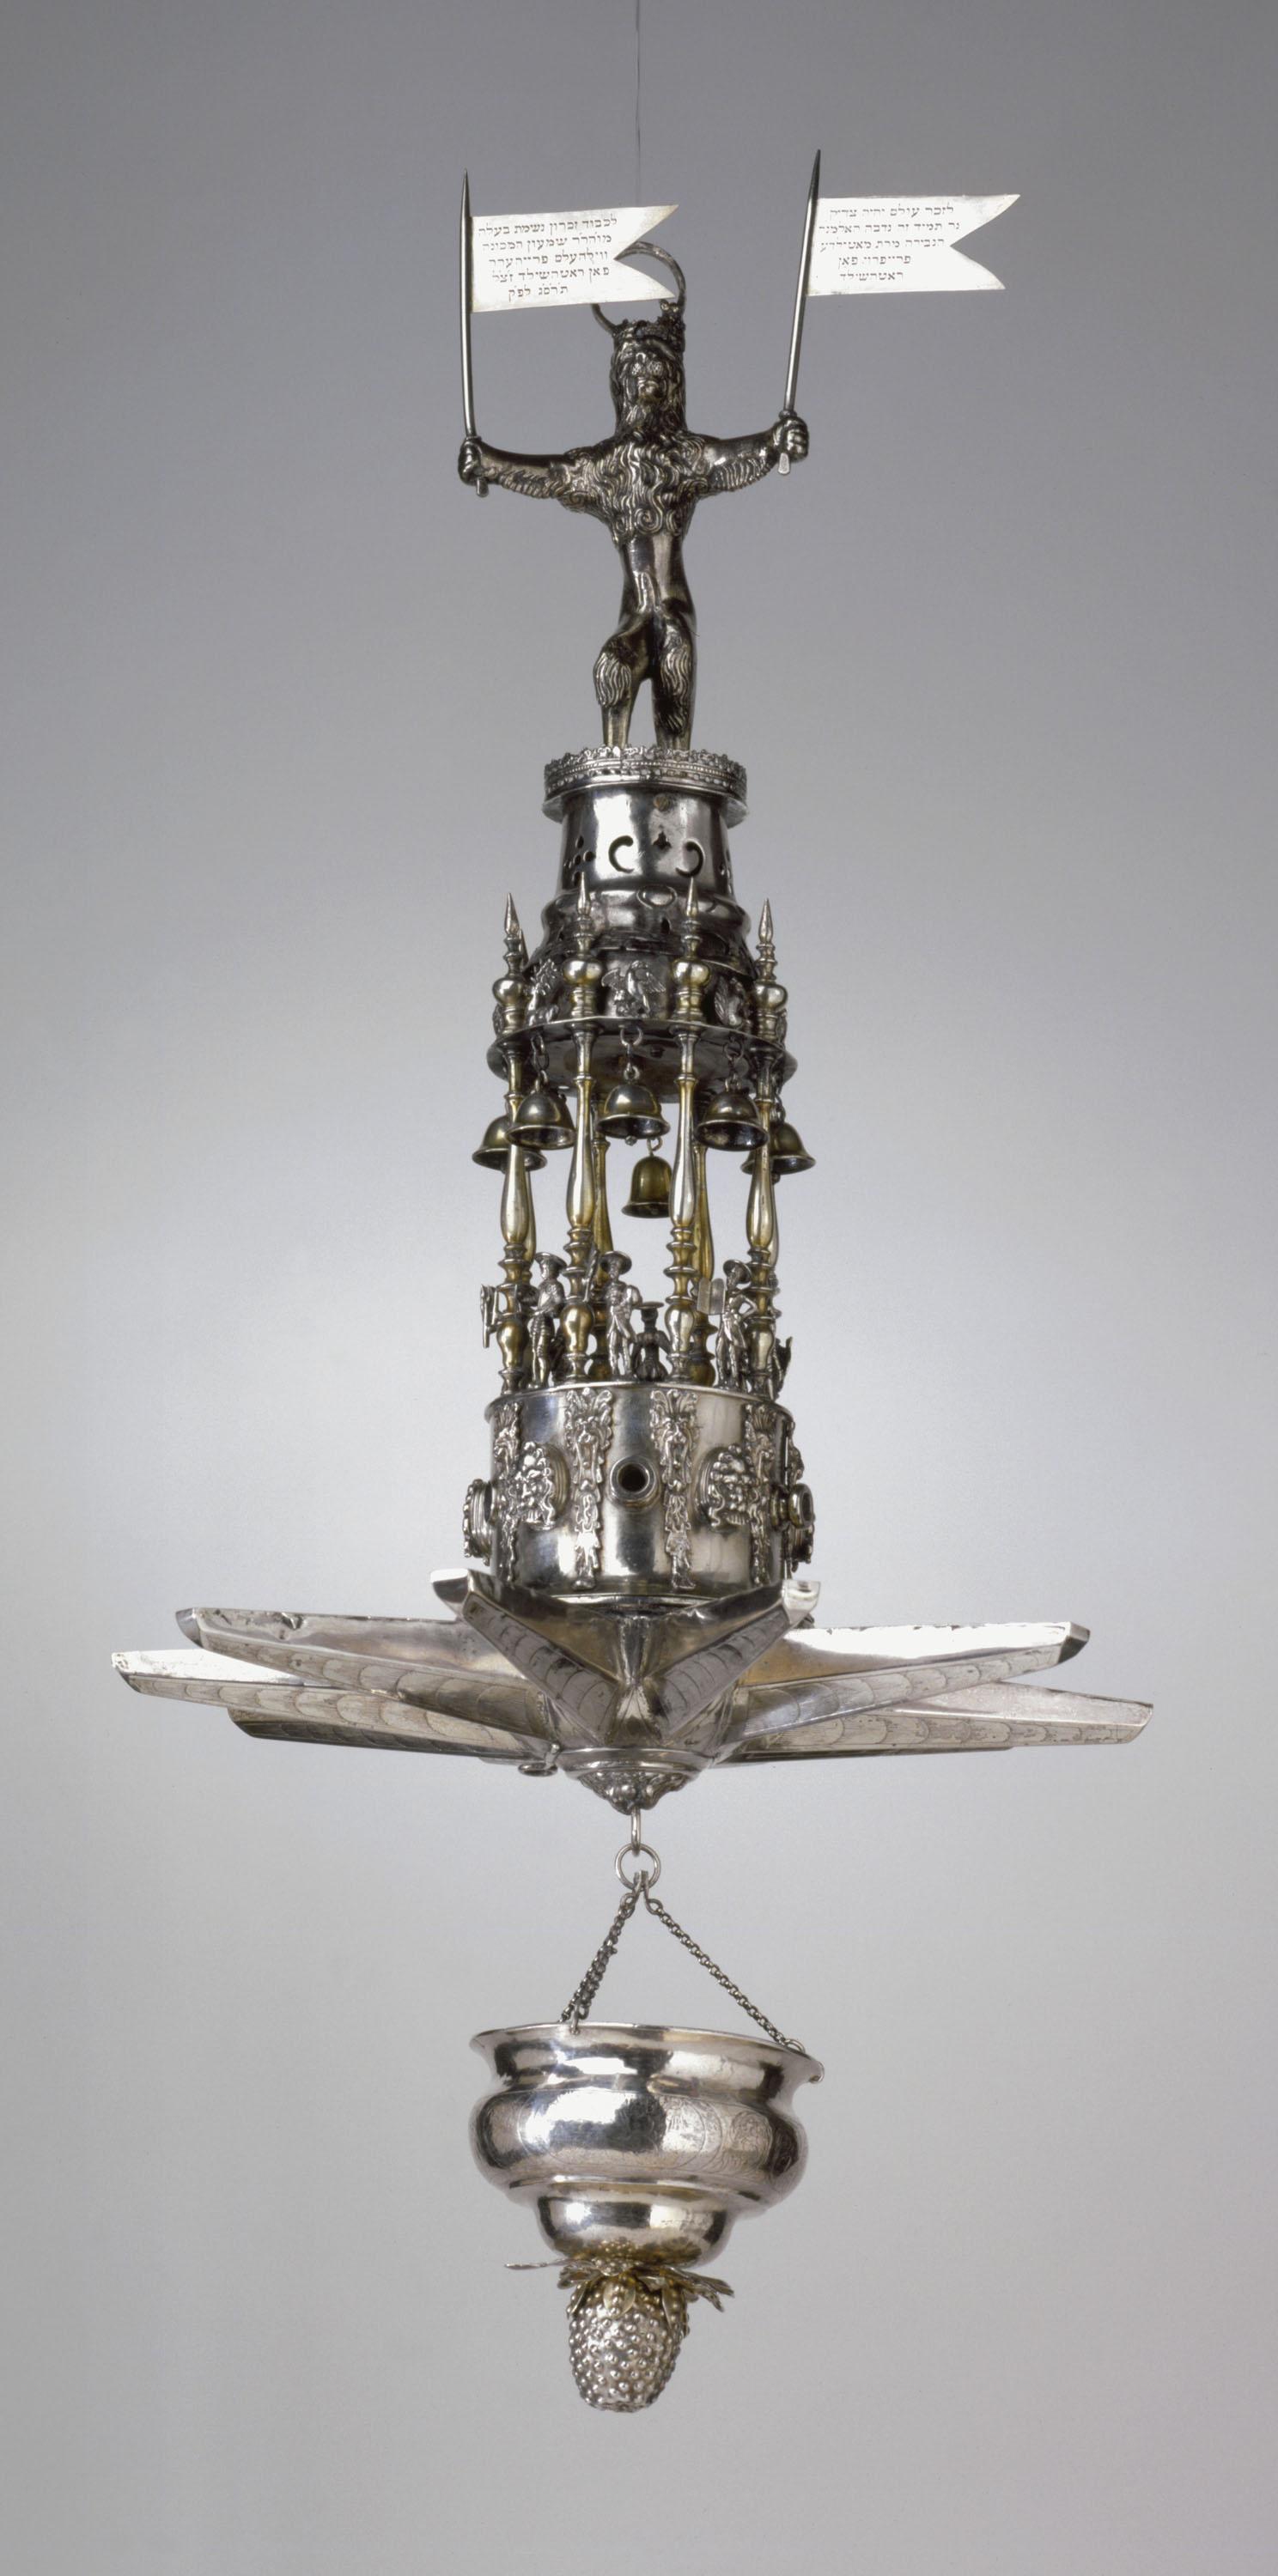 Silver multi-tiered hanging lamp with sculpture of lion on top. 